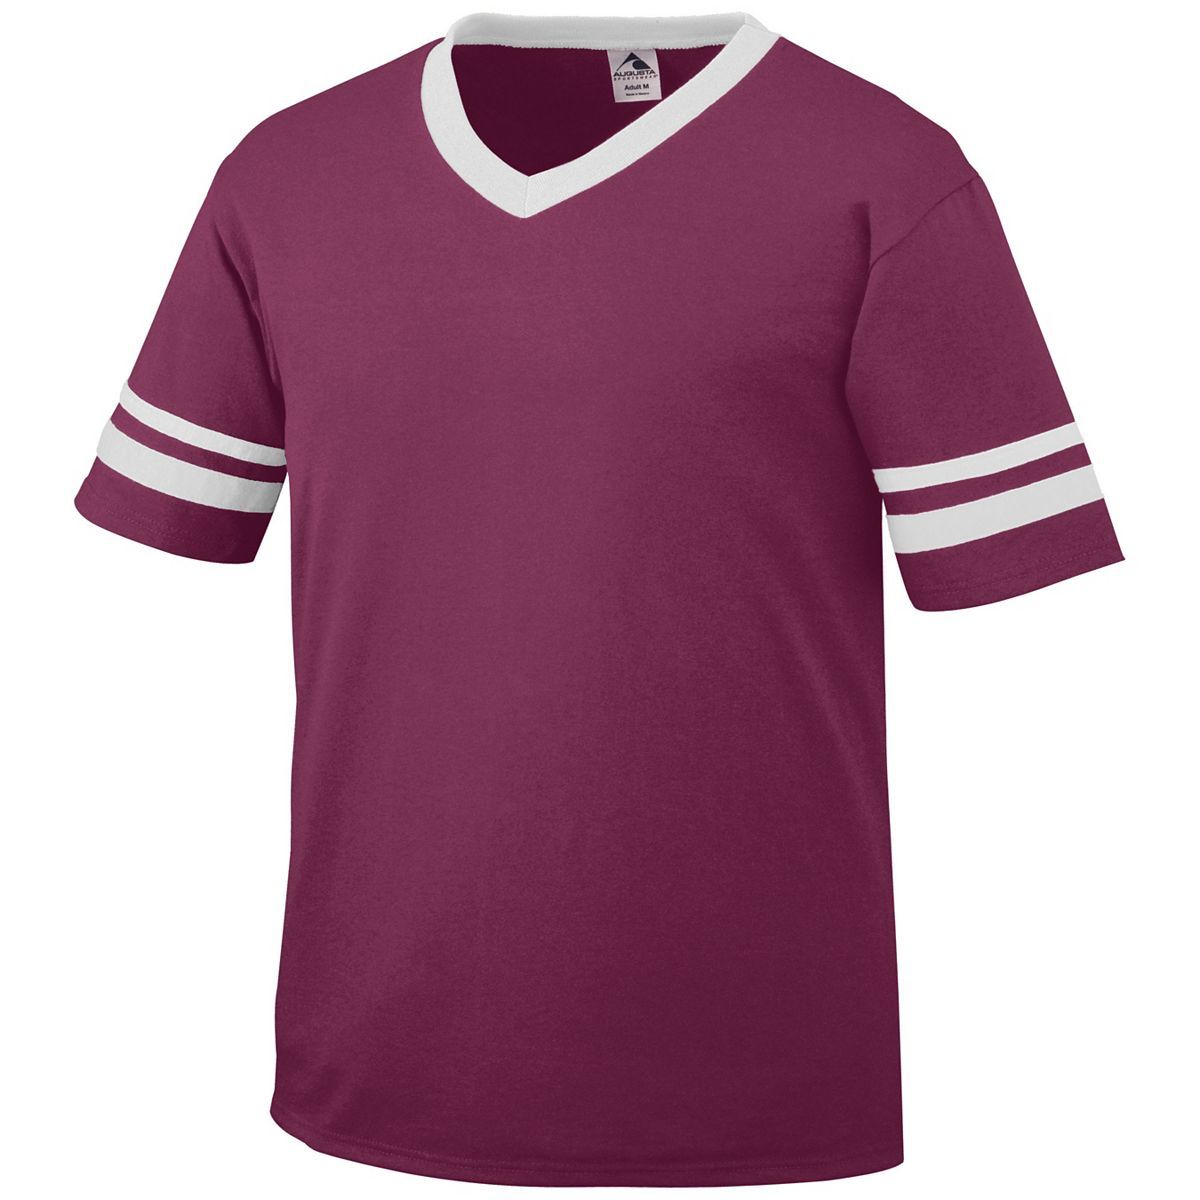 Augusta Sportswear Youth Sleeve Stripe Jersey in Maroon/White  -Part of the Youth, Youth-Jersey, Augusta-Products, Shirts product lines at KanaleyCreations.com